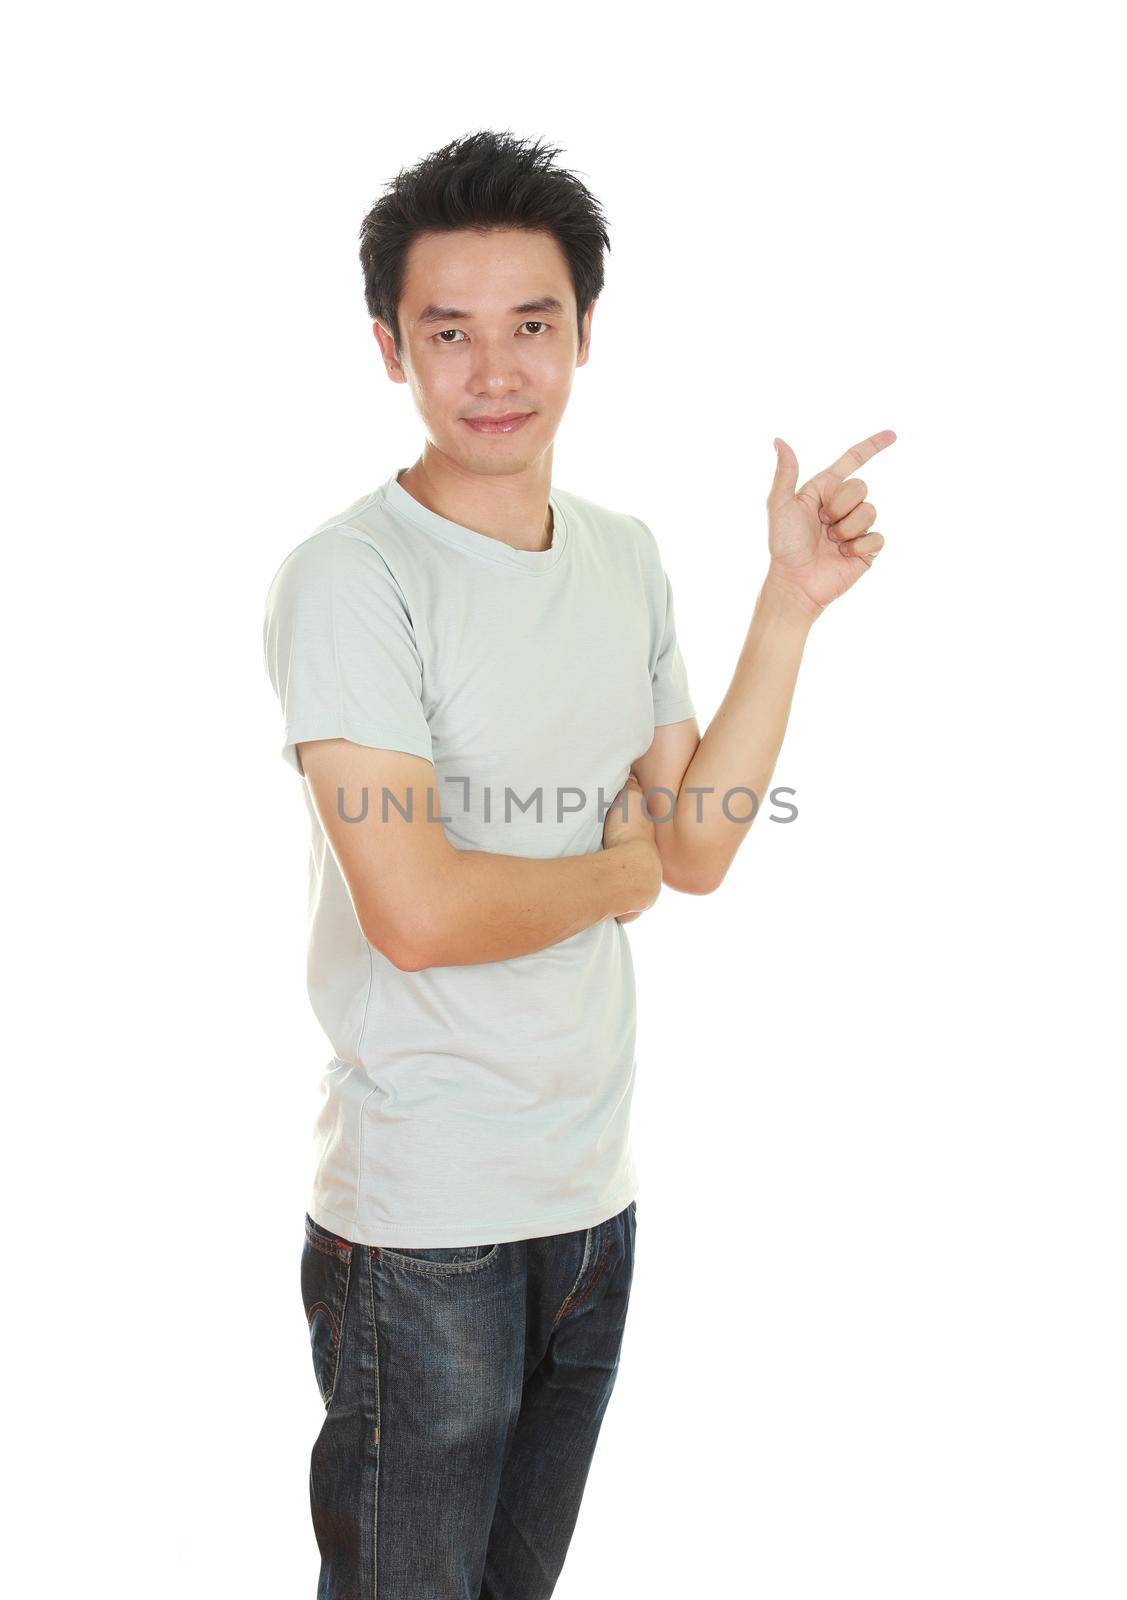 man think of idea with t-shirt isolated on white background